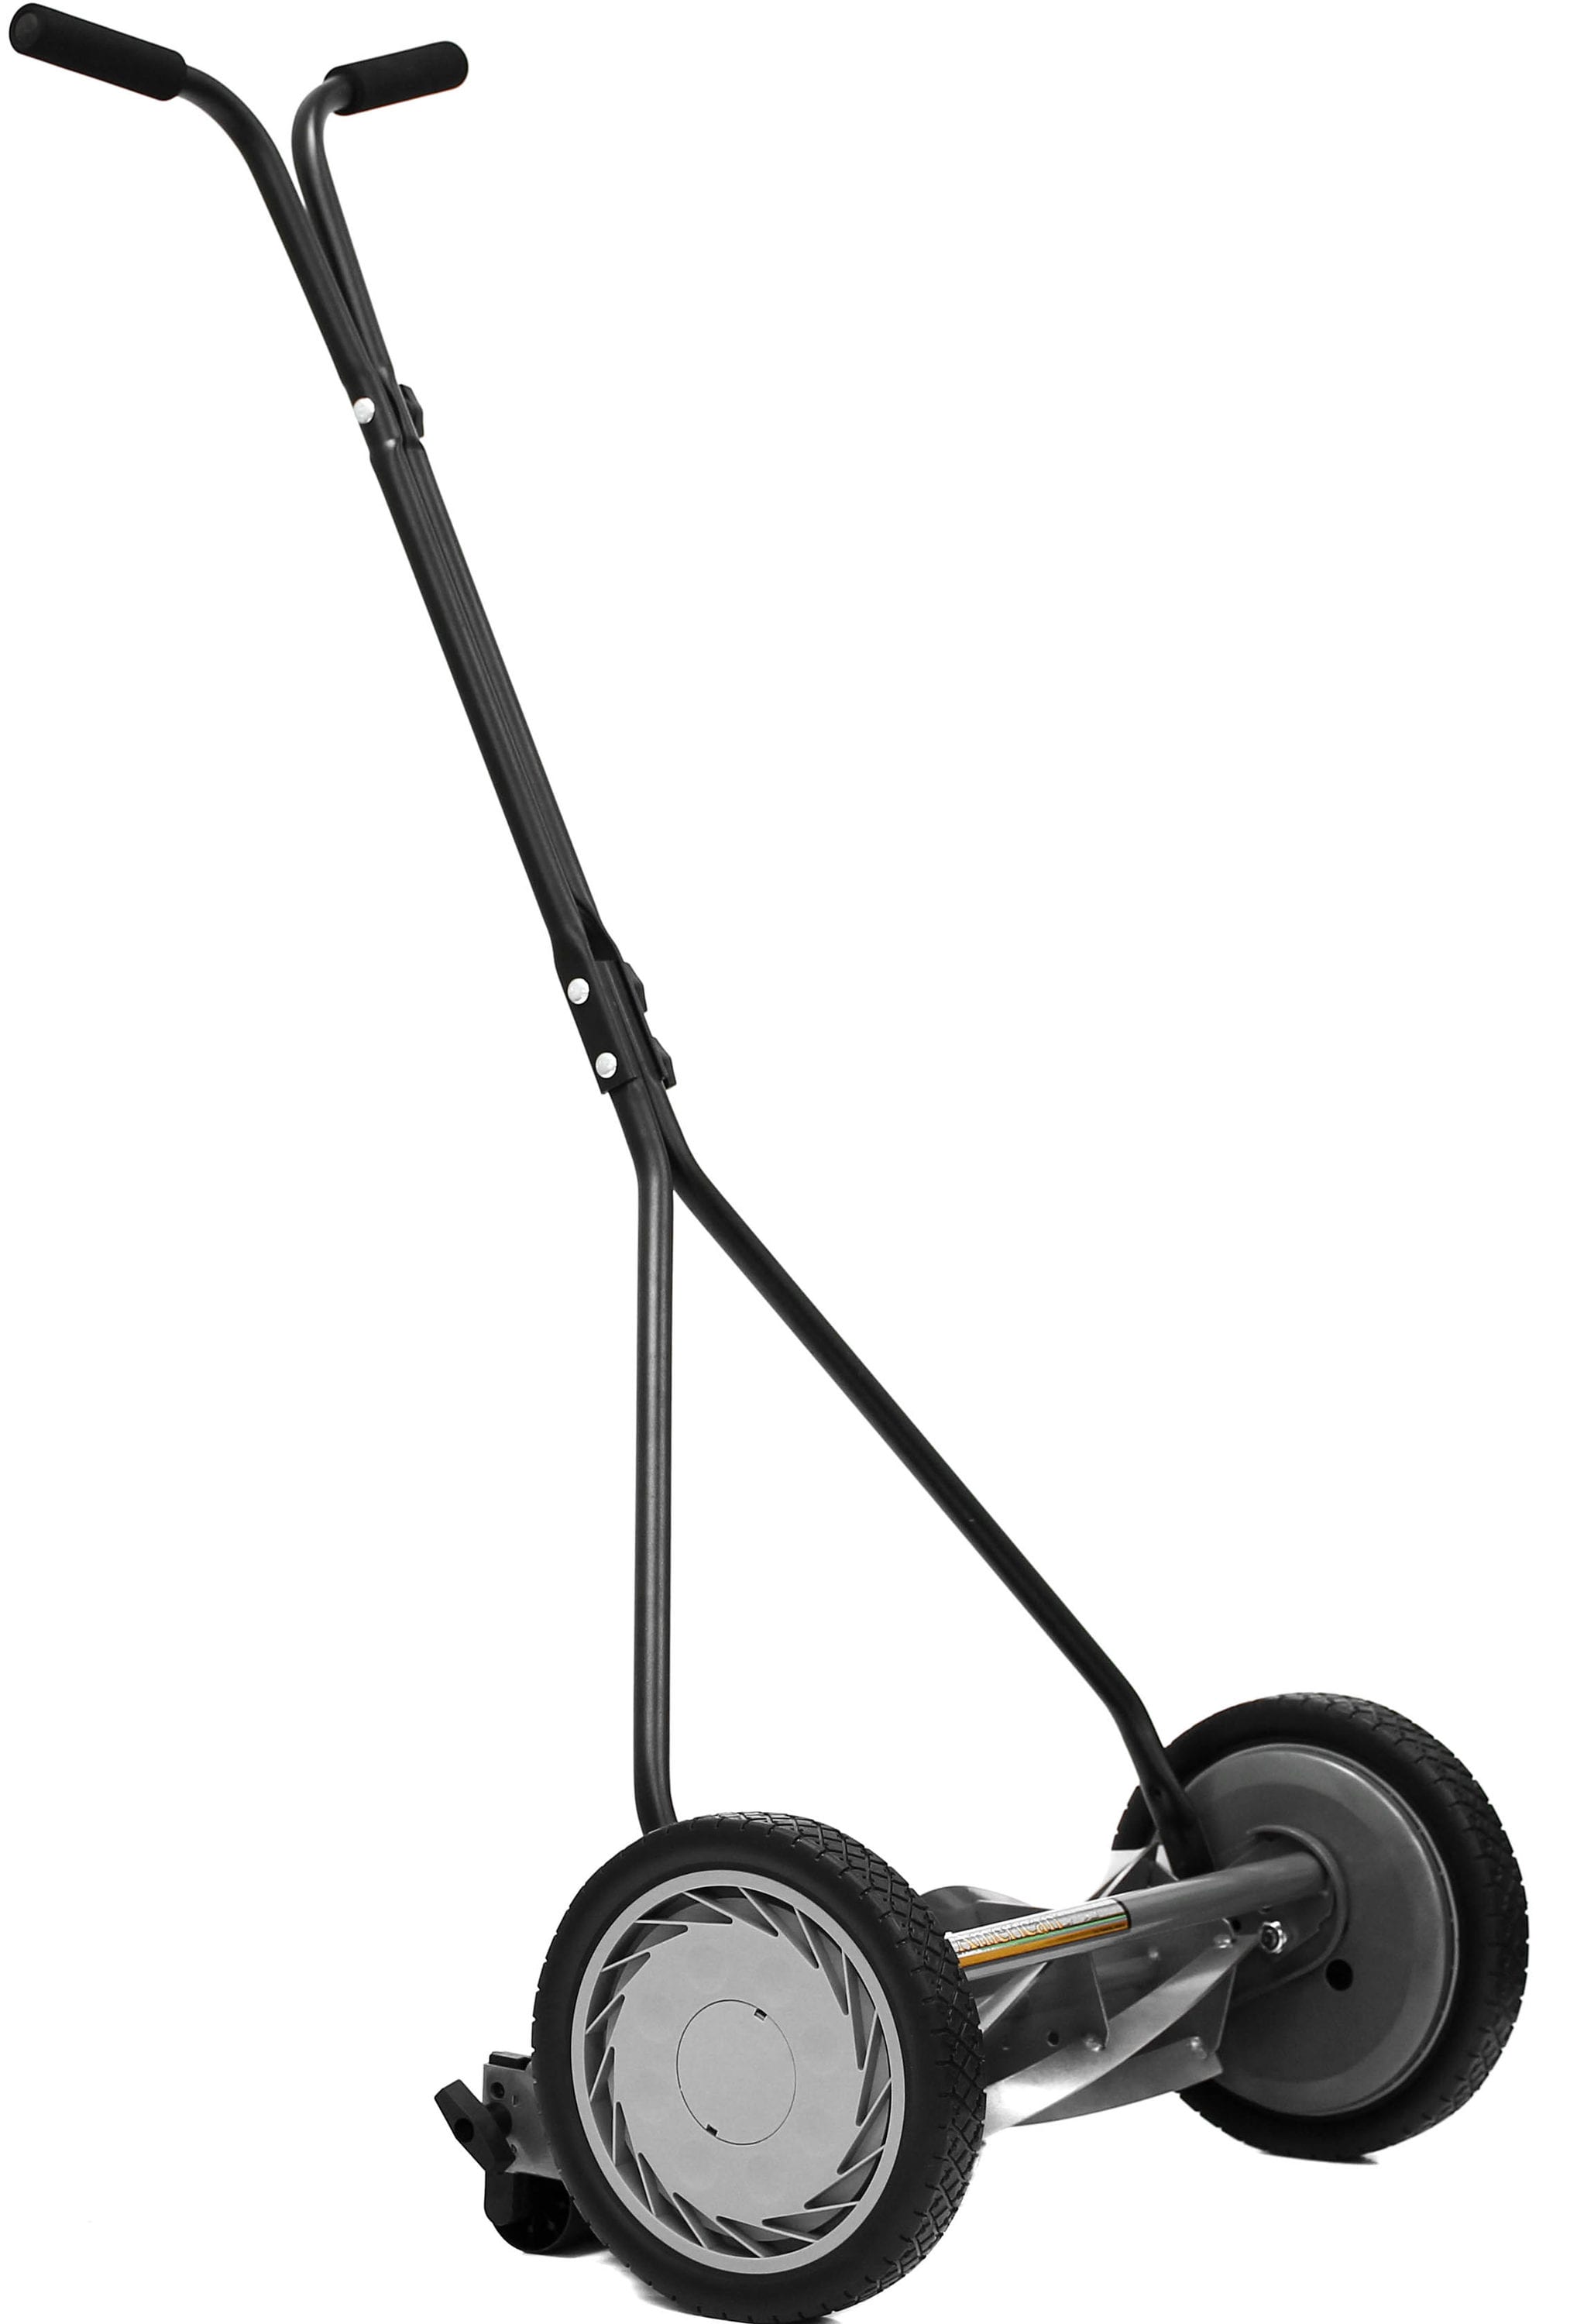 American Lawn Mower 16-Inch Reel Lawn Mower with 5-Blade Ball